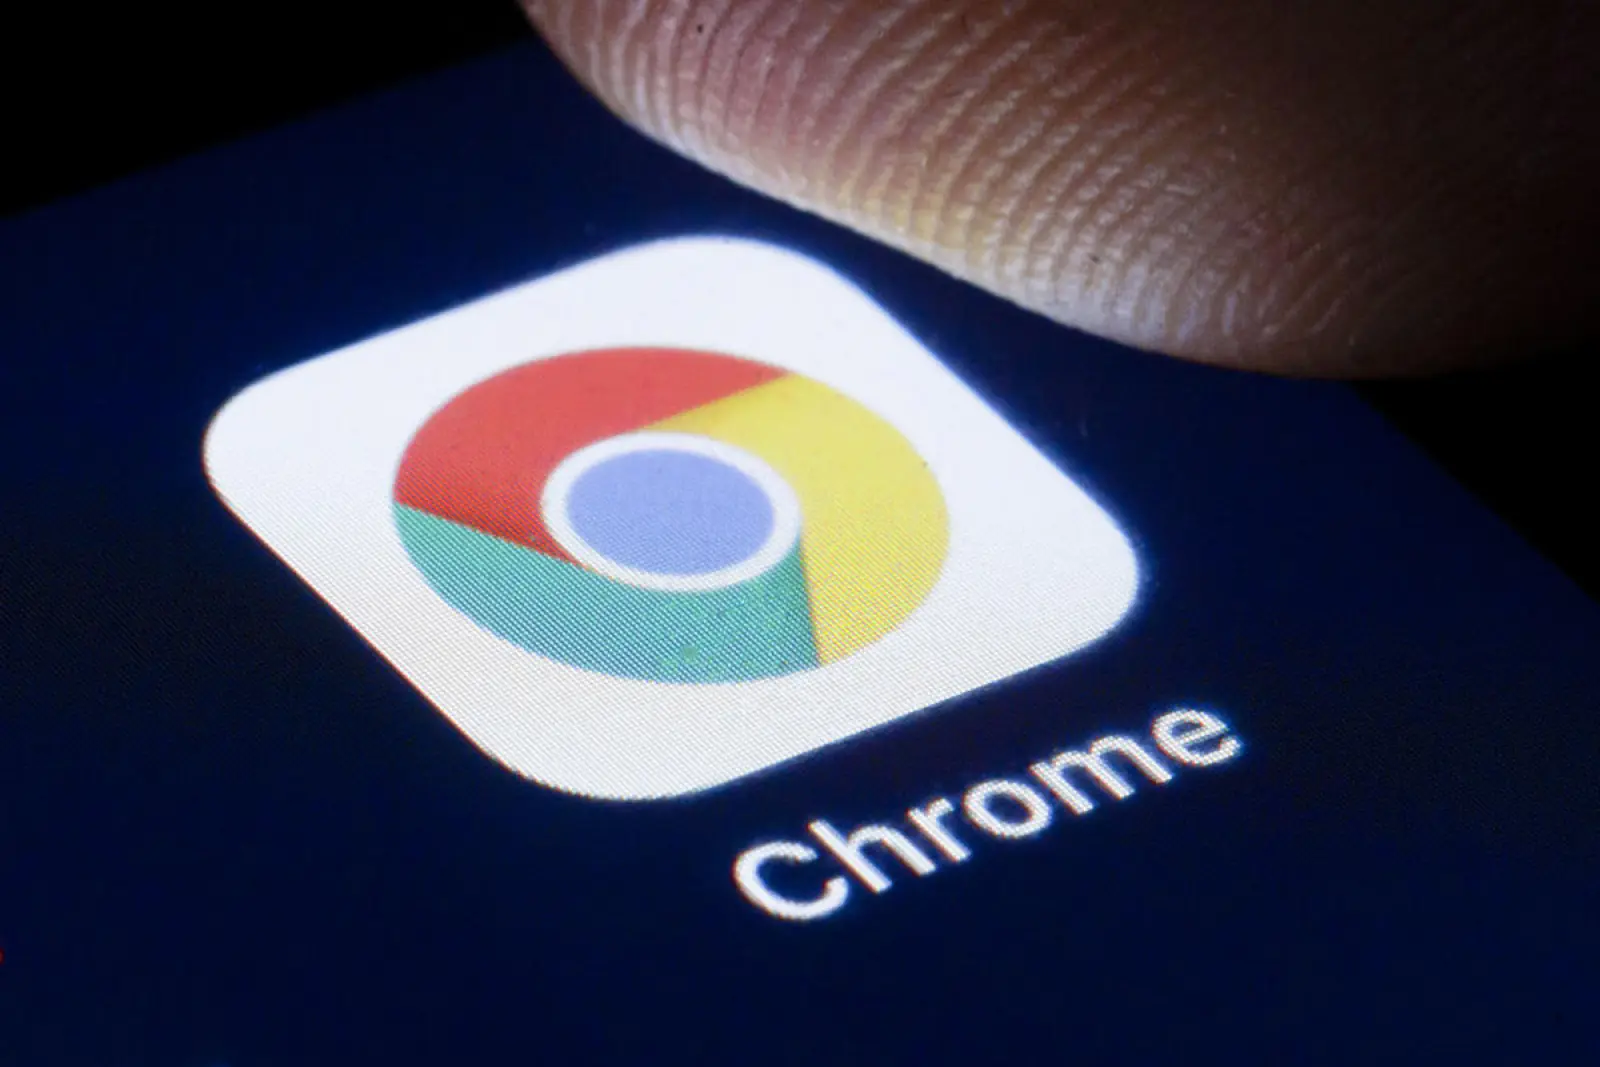 Chrome: Google itself will tell you when your tracking is happening, wisdom came after paying billions of rupees fine